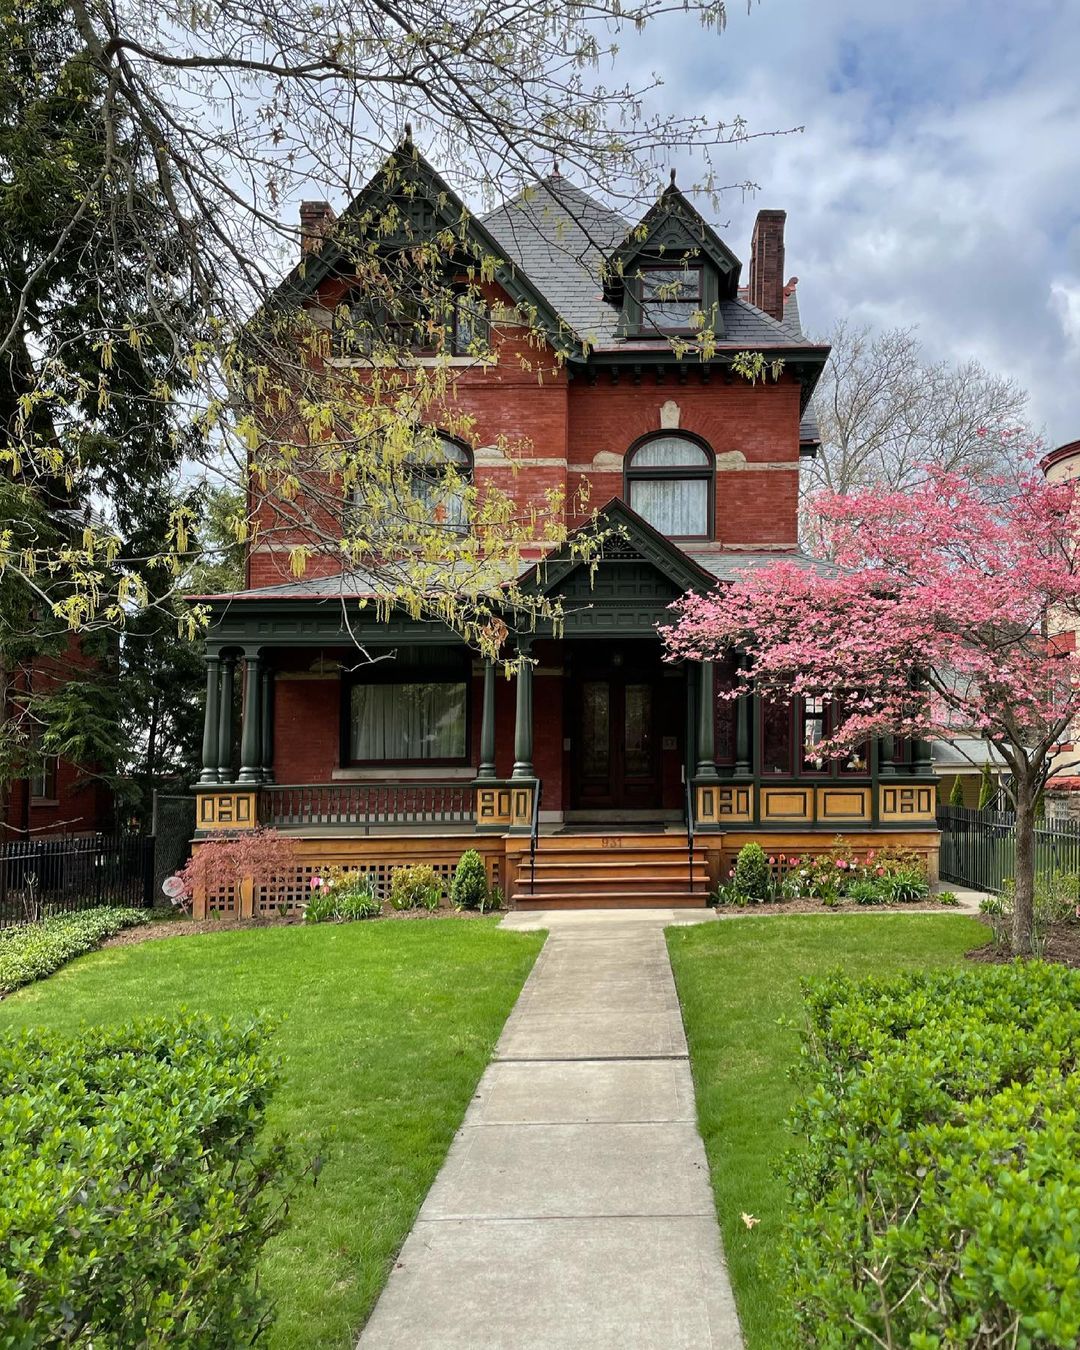 Victorian brick house with trees in Highland Park, Pittsburgh. Photo from Instagram user @cyat.es